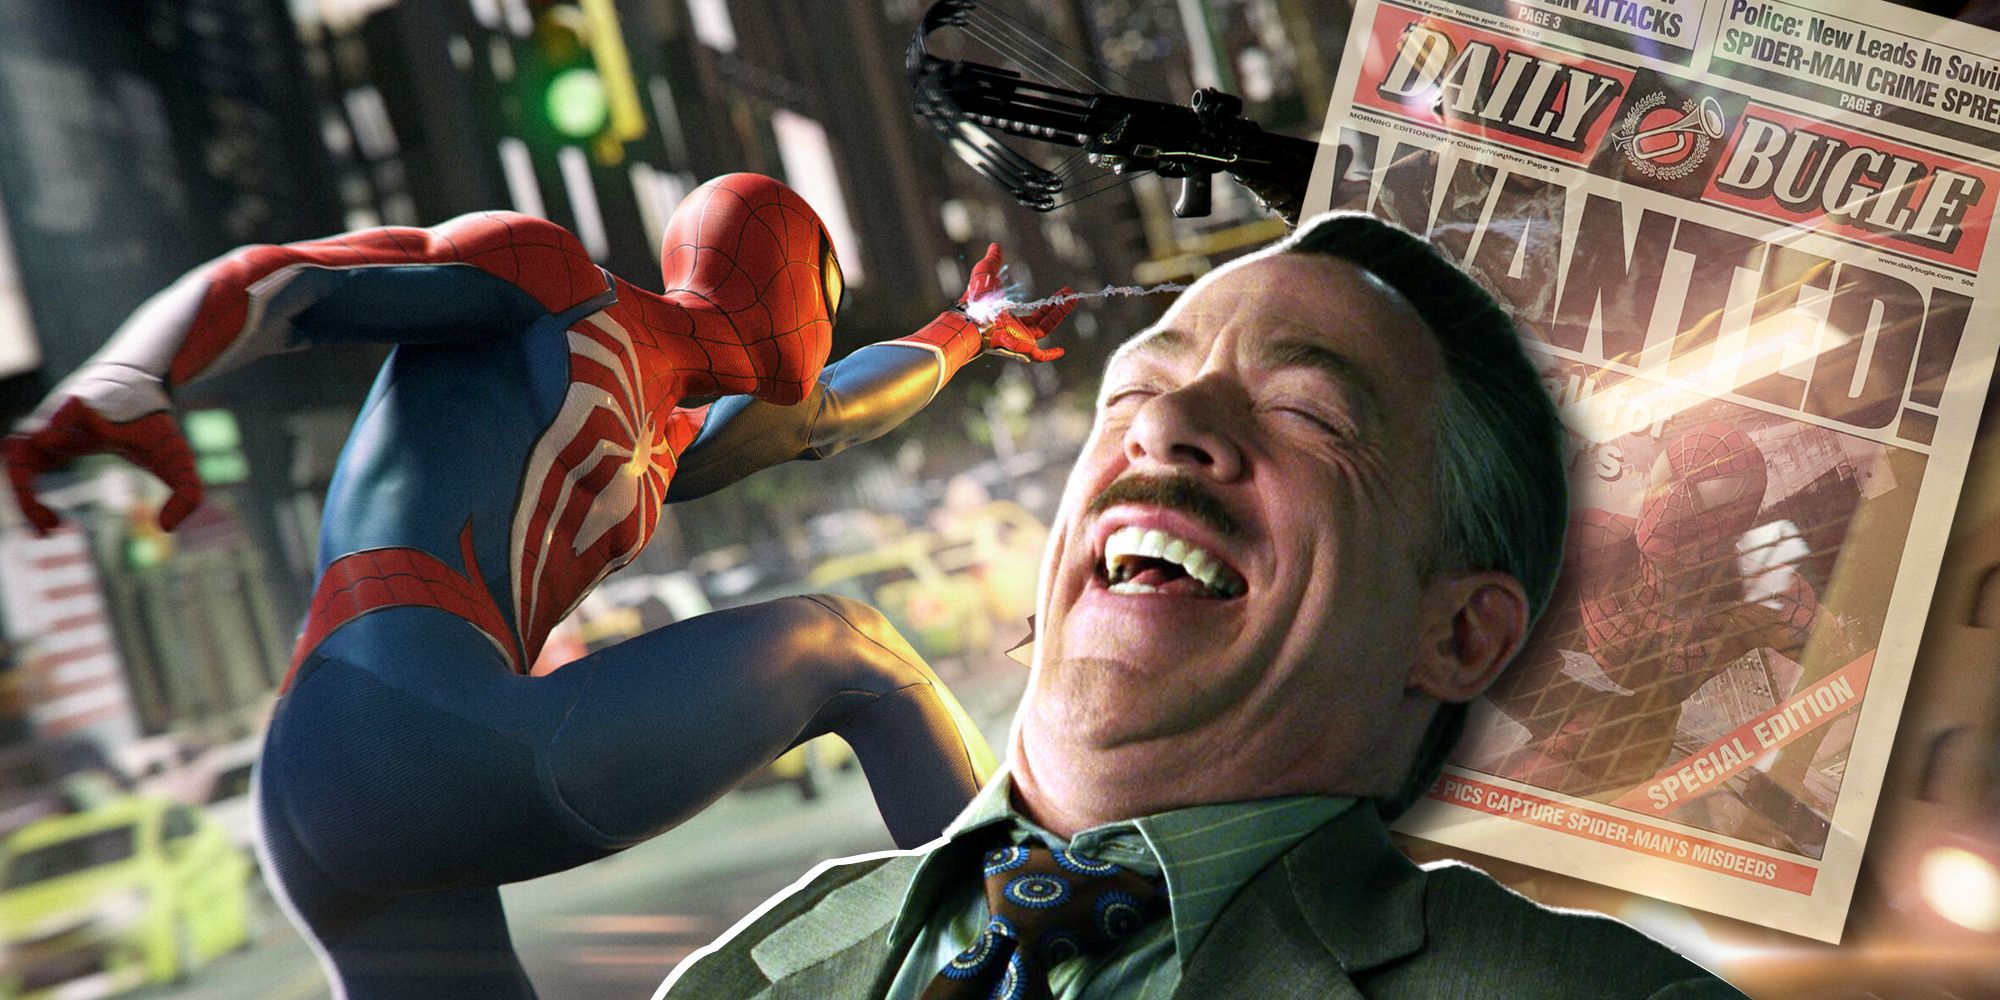 Collage image with Insomniac's Peter Parker Spider-Man sending out a web on the left, with the J.K. Simmons J. Jonah Jameson laughing at the bottom, and a Daily Bugle that has a big headline reading 